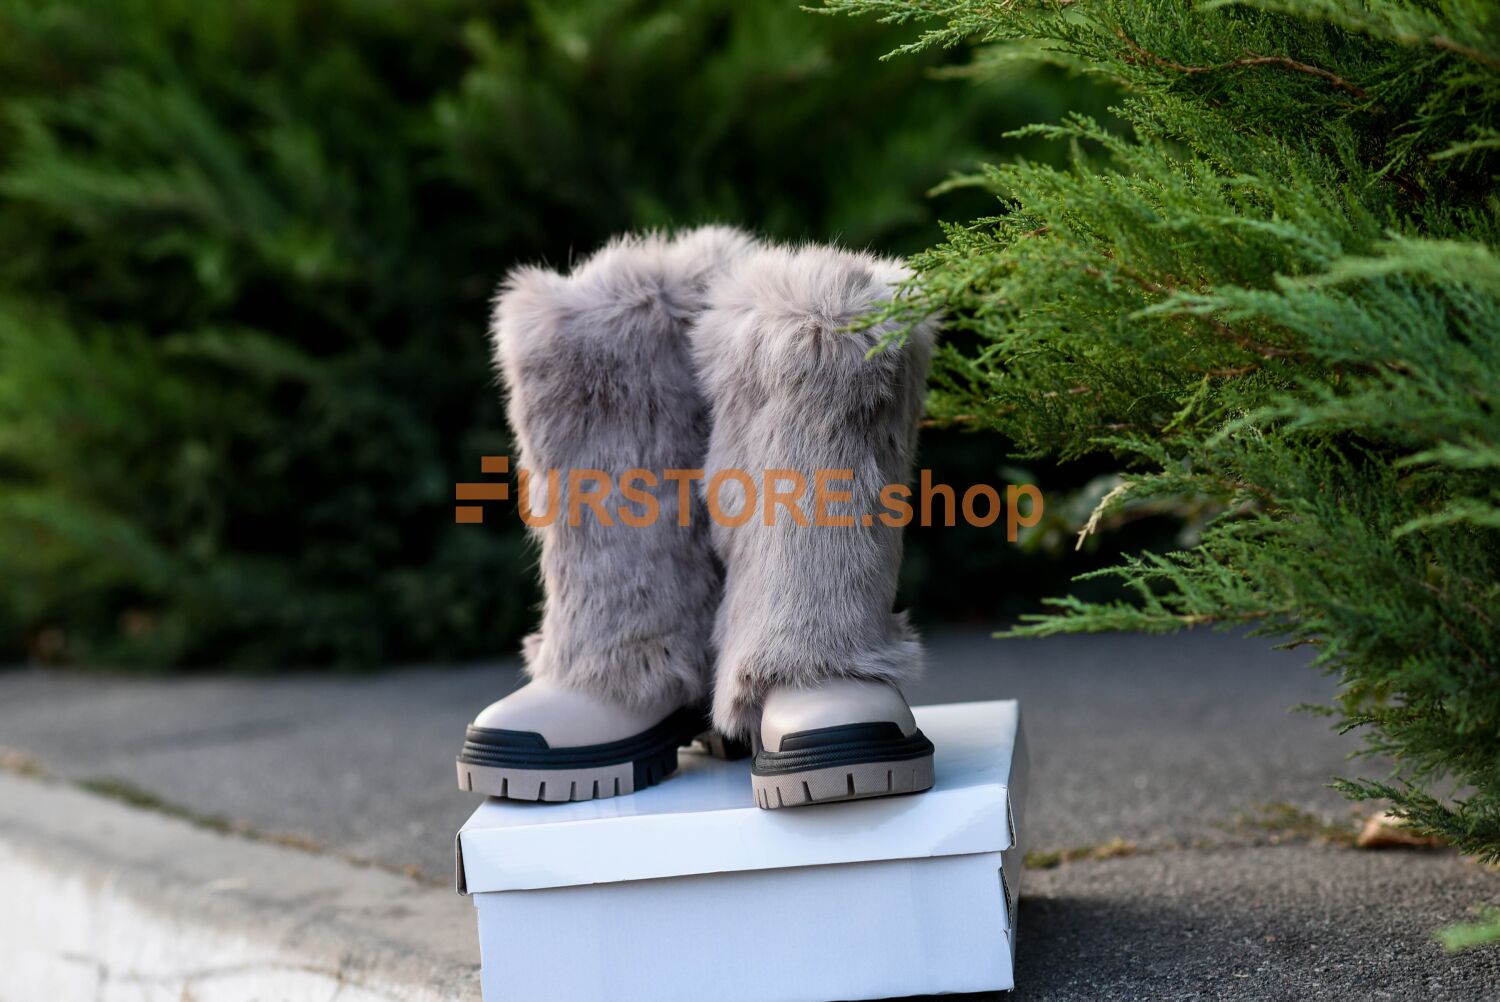 Women's high boots with beige fur, on fashionable soles